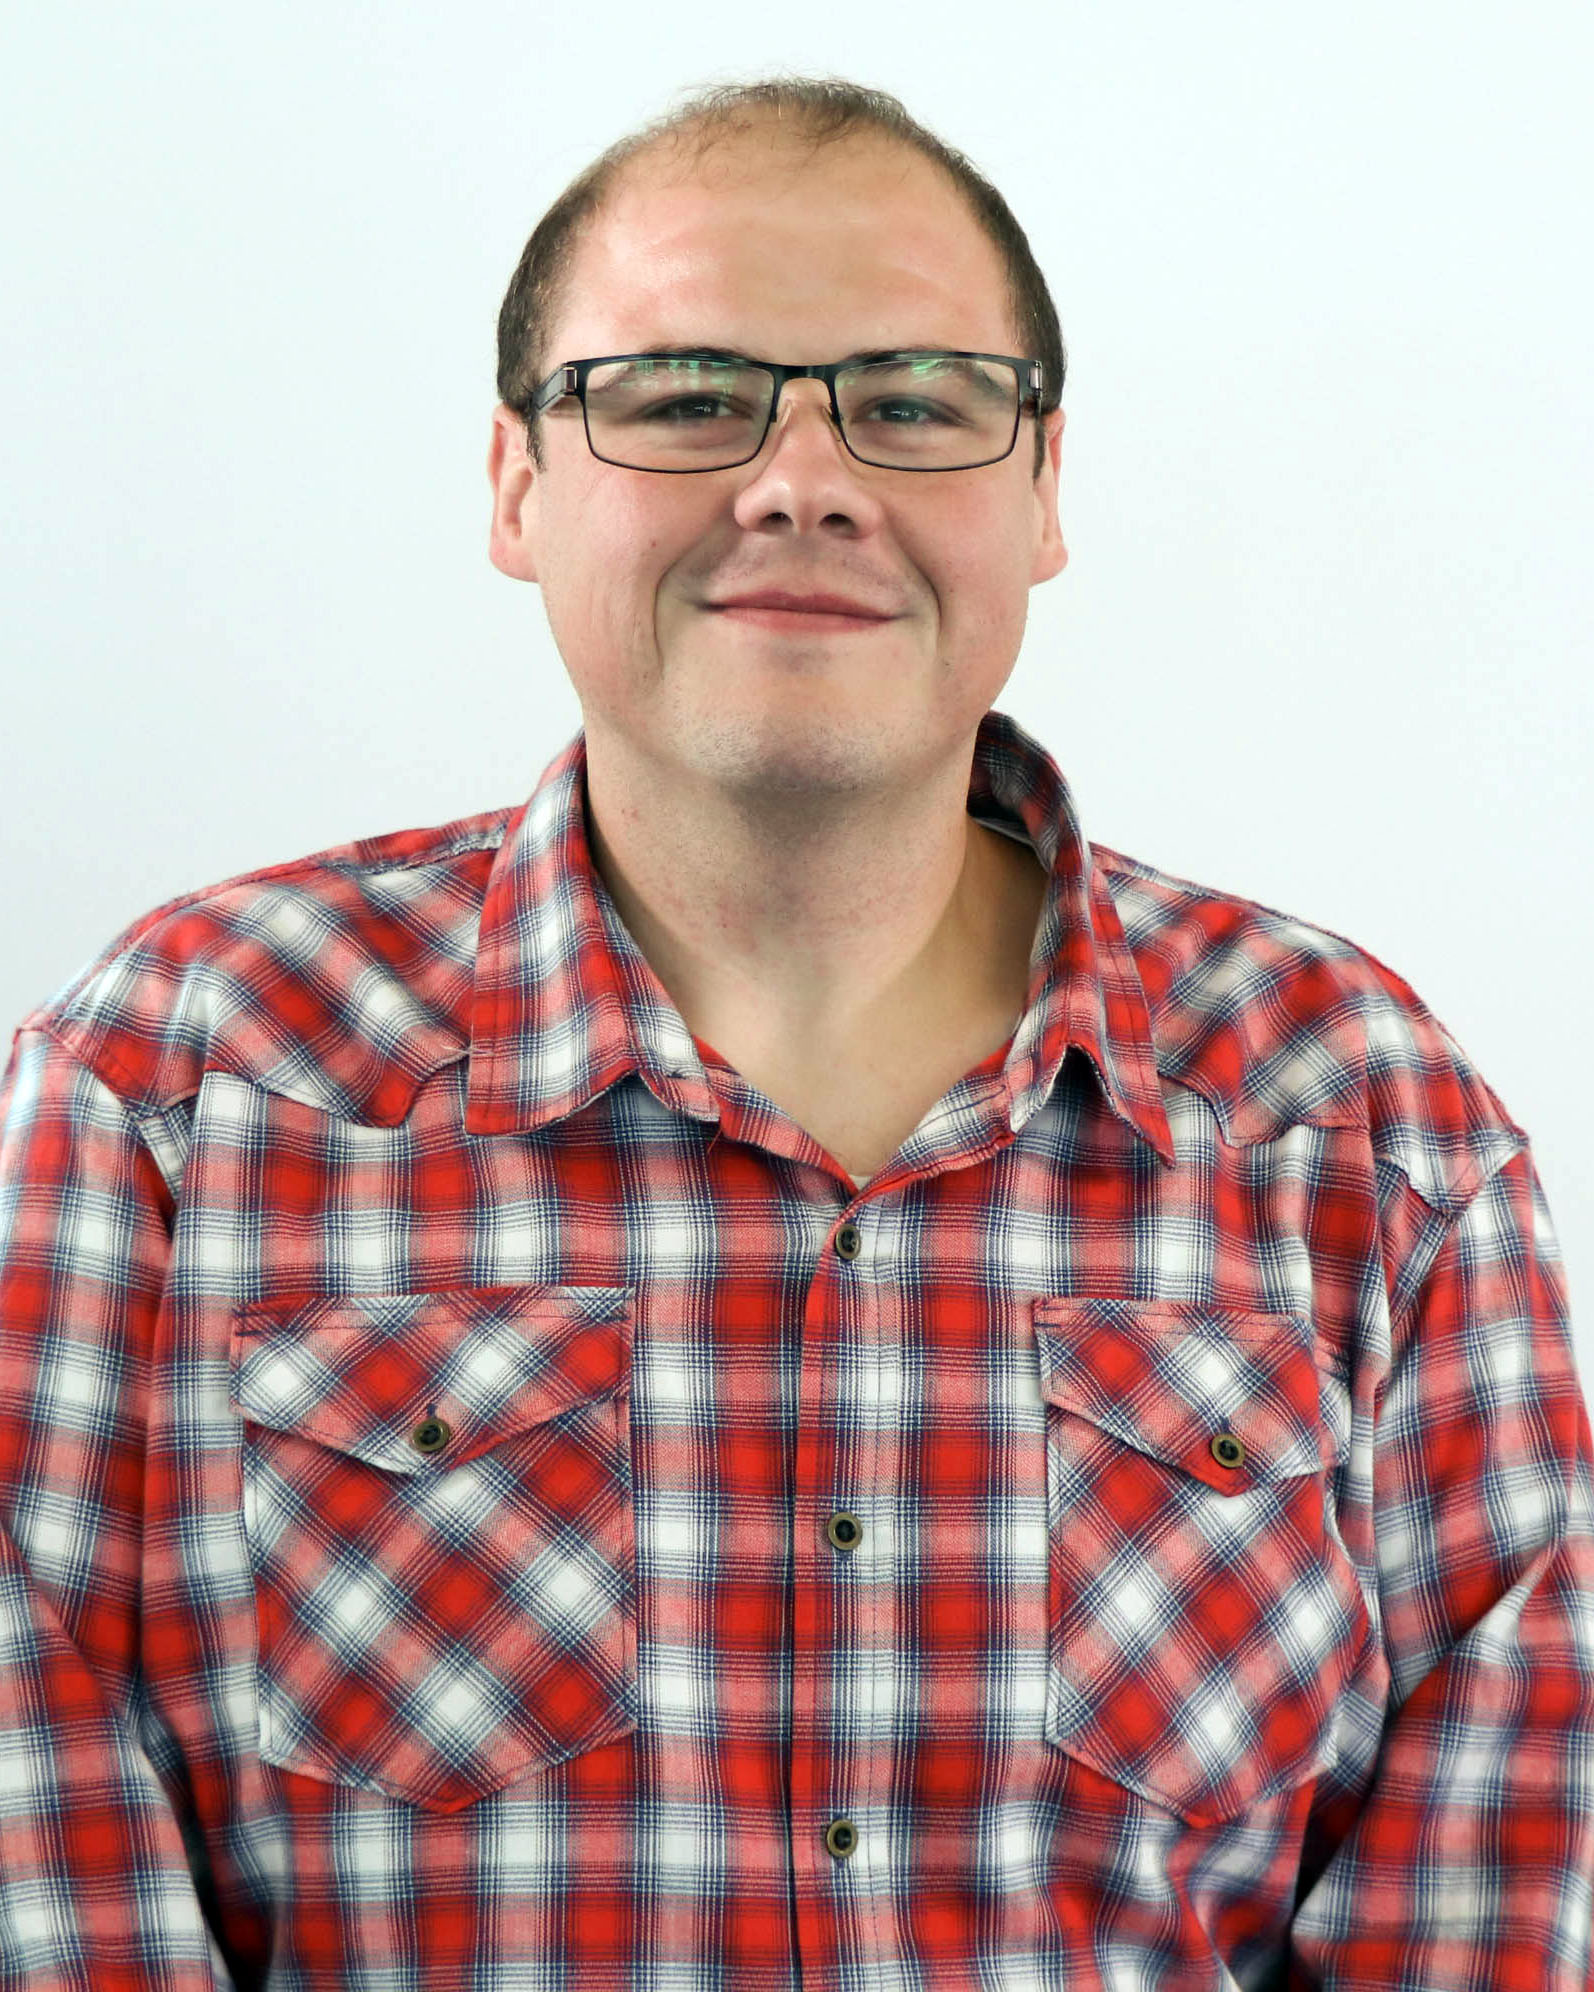 Man wearing a red plaid shirt and glasses